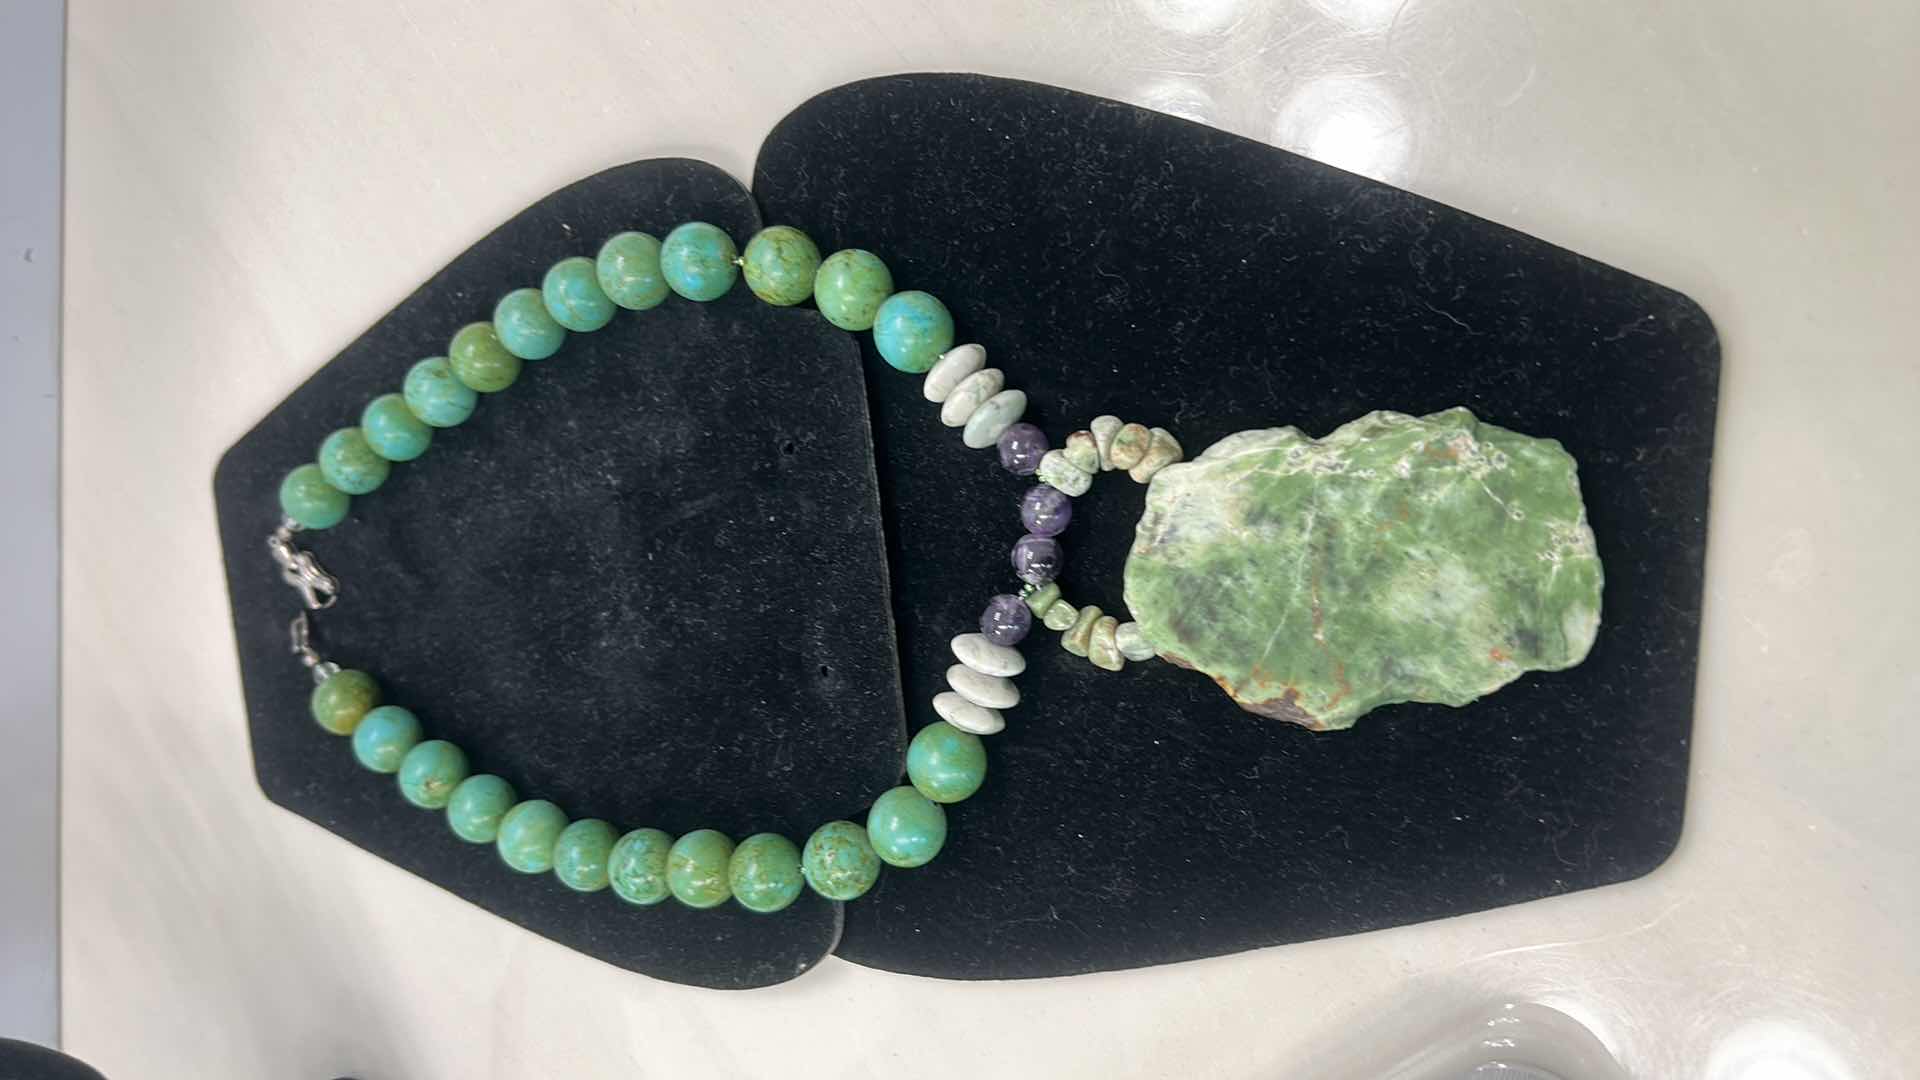 Photo 2 of STUNNING STONE NECKLACE, JADE MEASURES 2 1/4” x 3 1/4” ROUND 1/2” CHRYSOPRASE BEADS